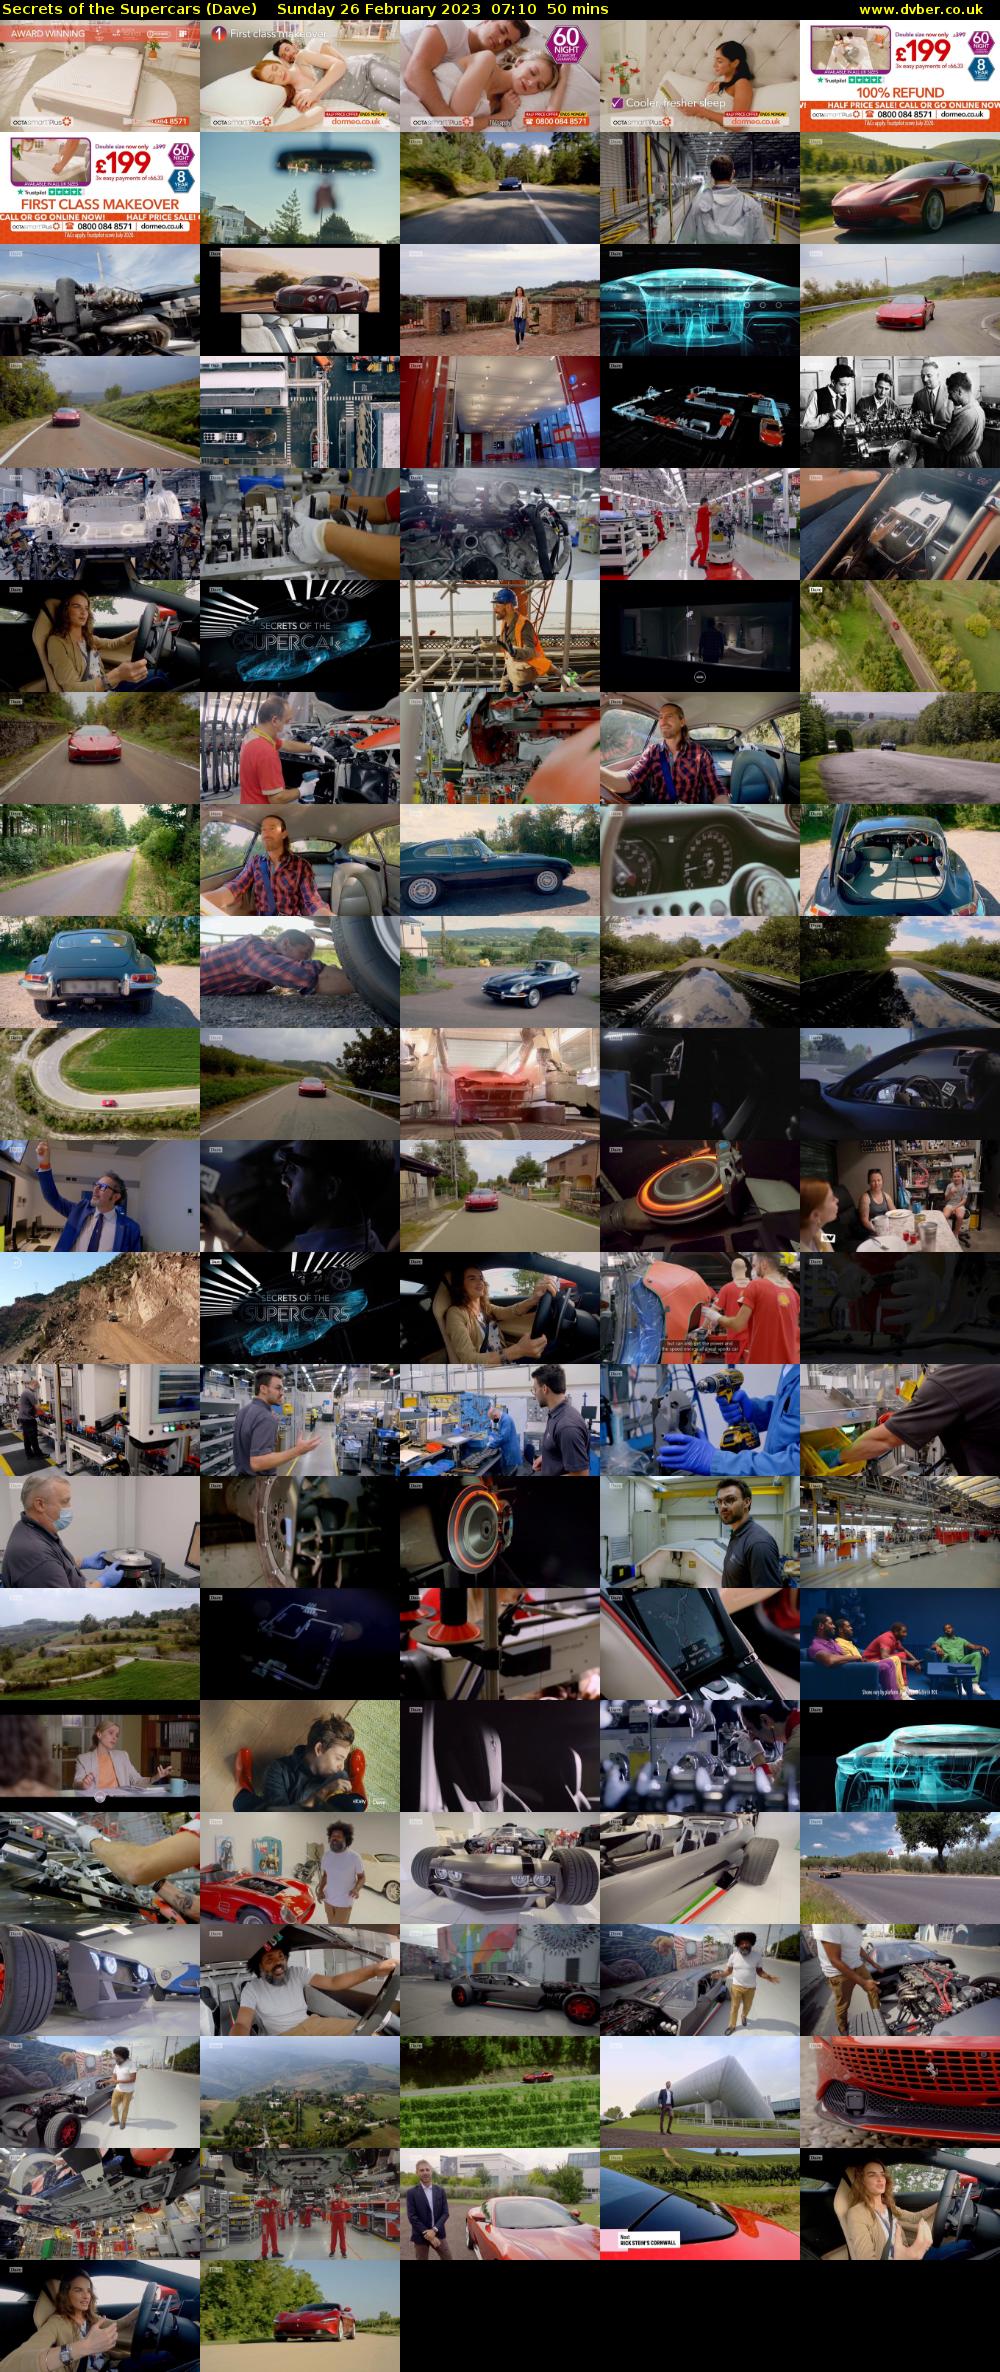 Secrets of the Supercars (Dave) Sunday 26 February 2023 07:10 - 08:00